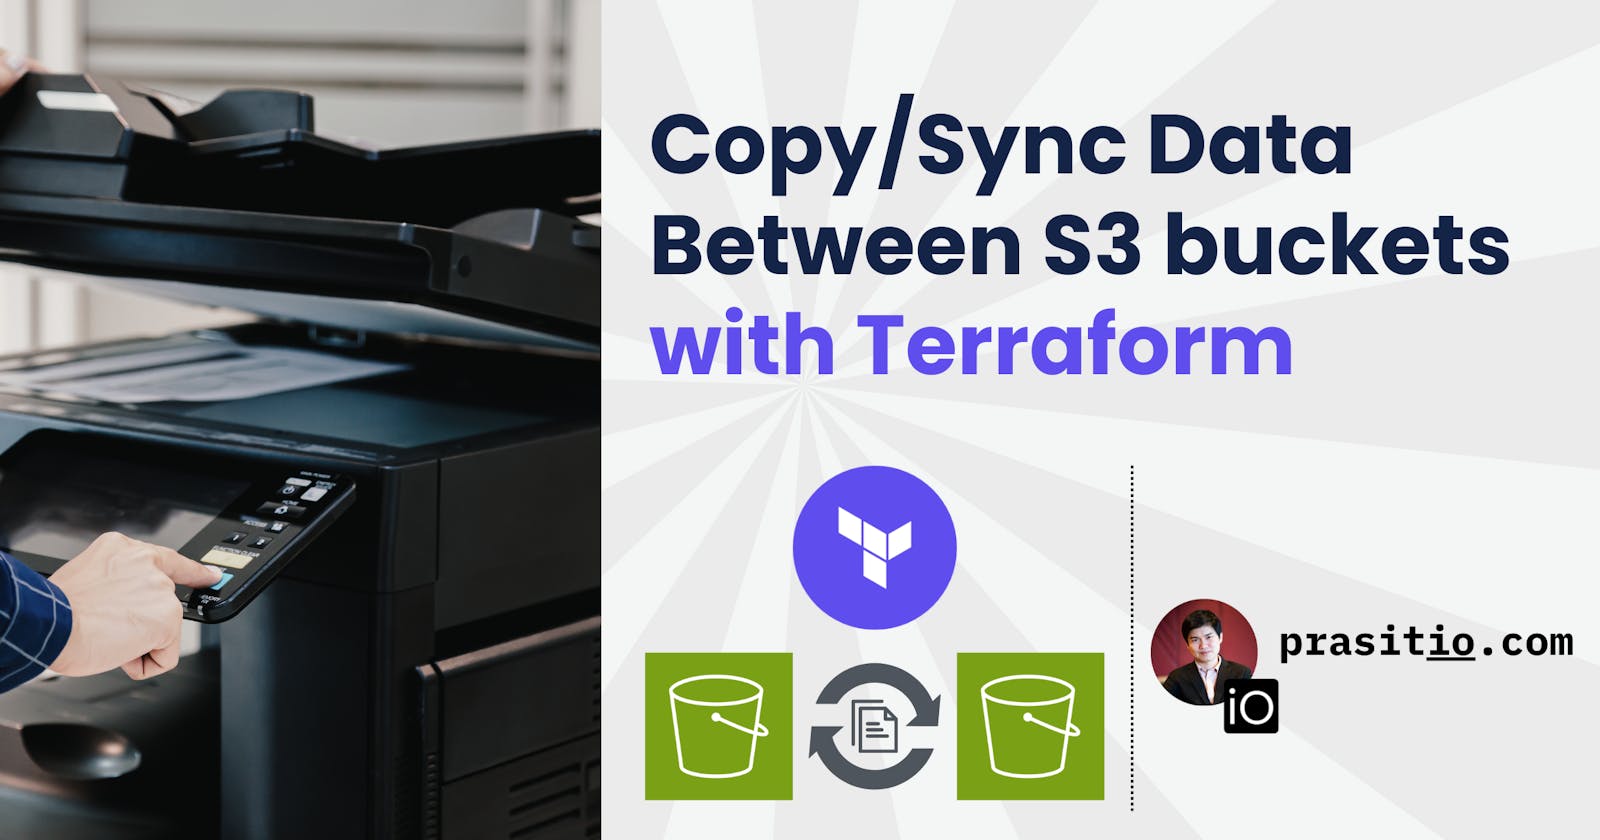 Copy/Sync data between two S3 buckets with Terraform